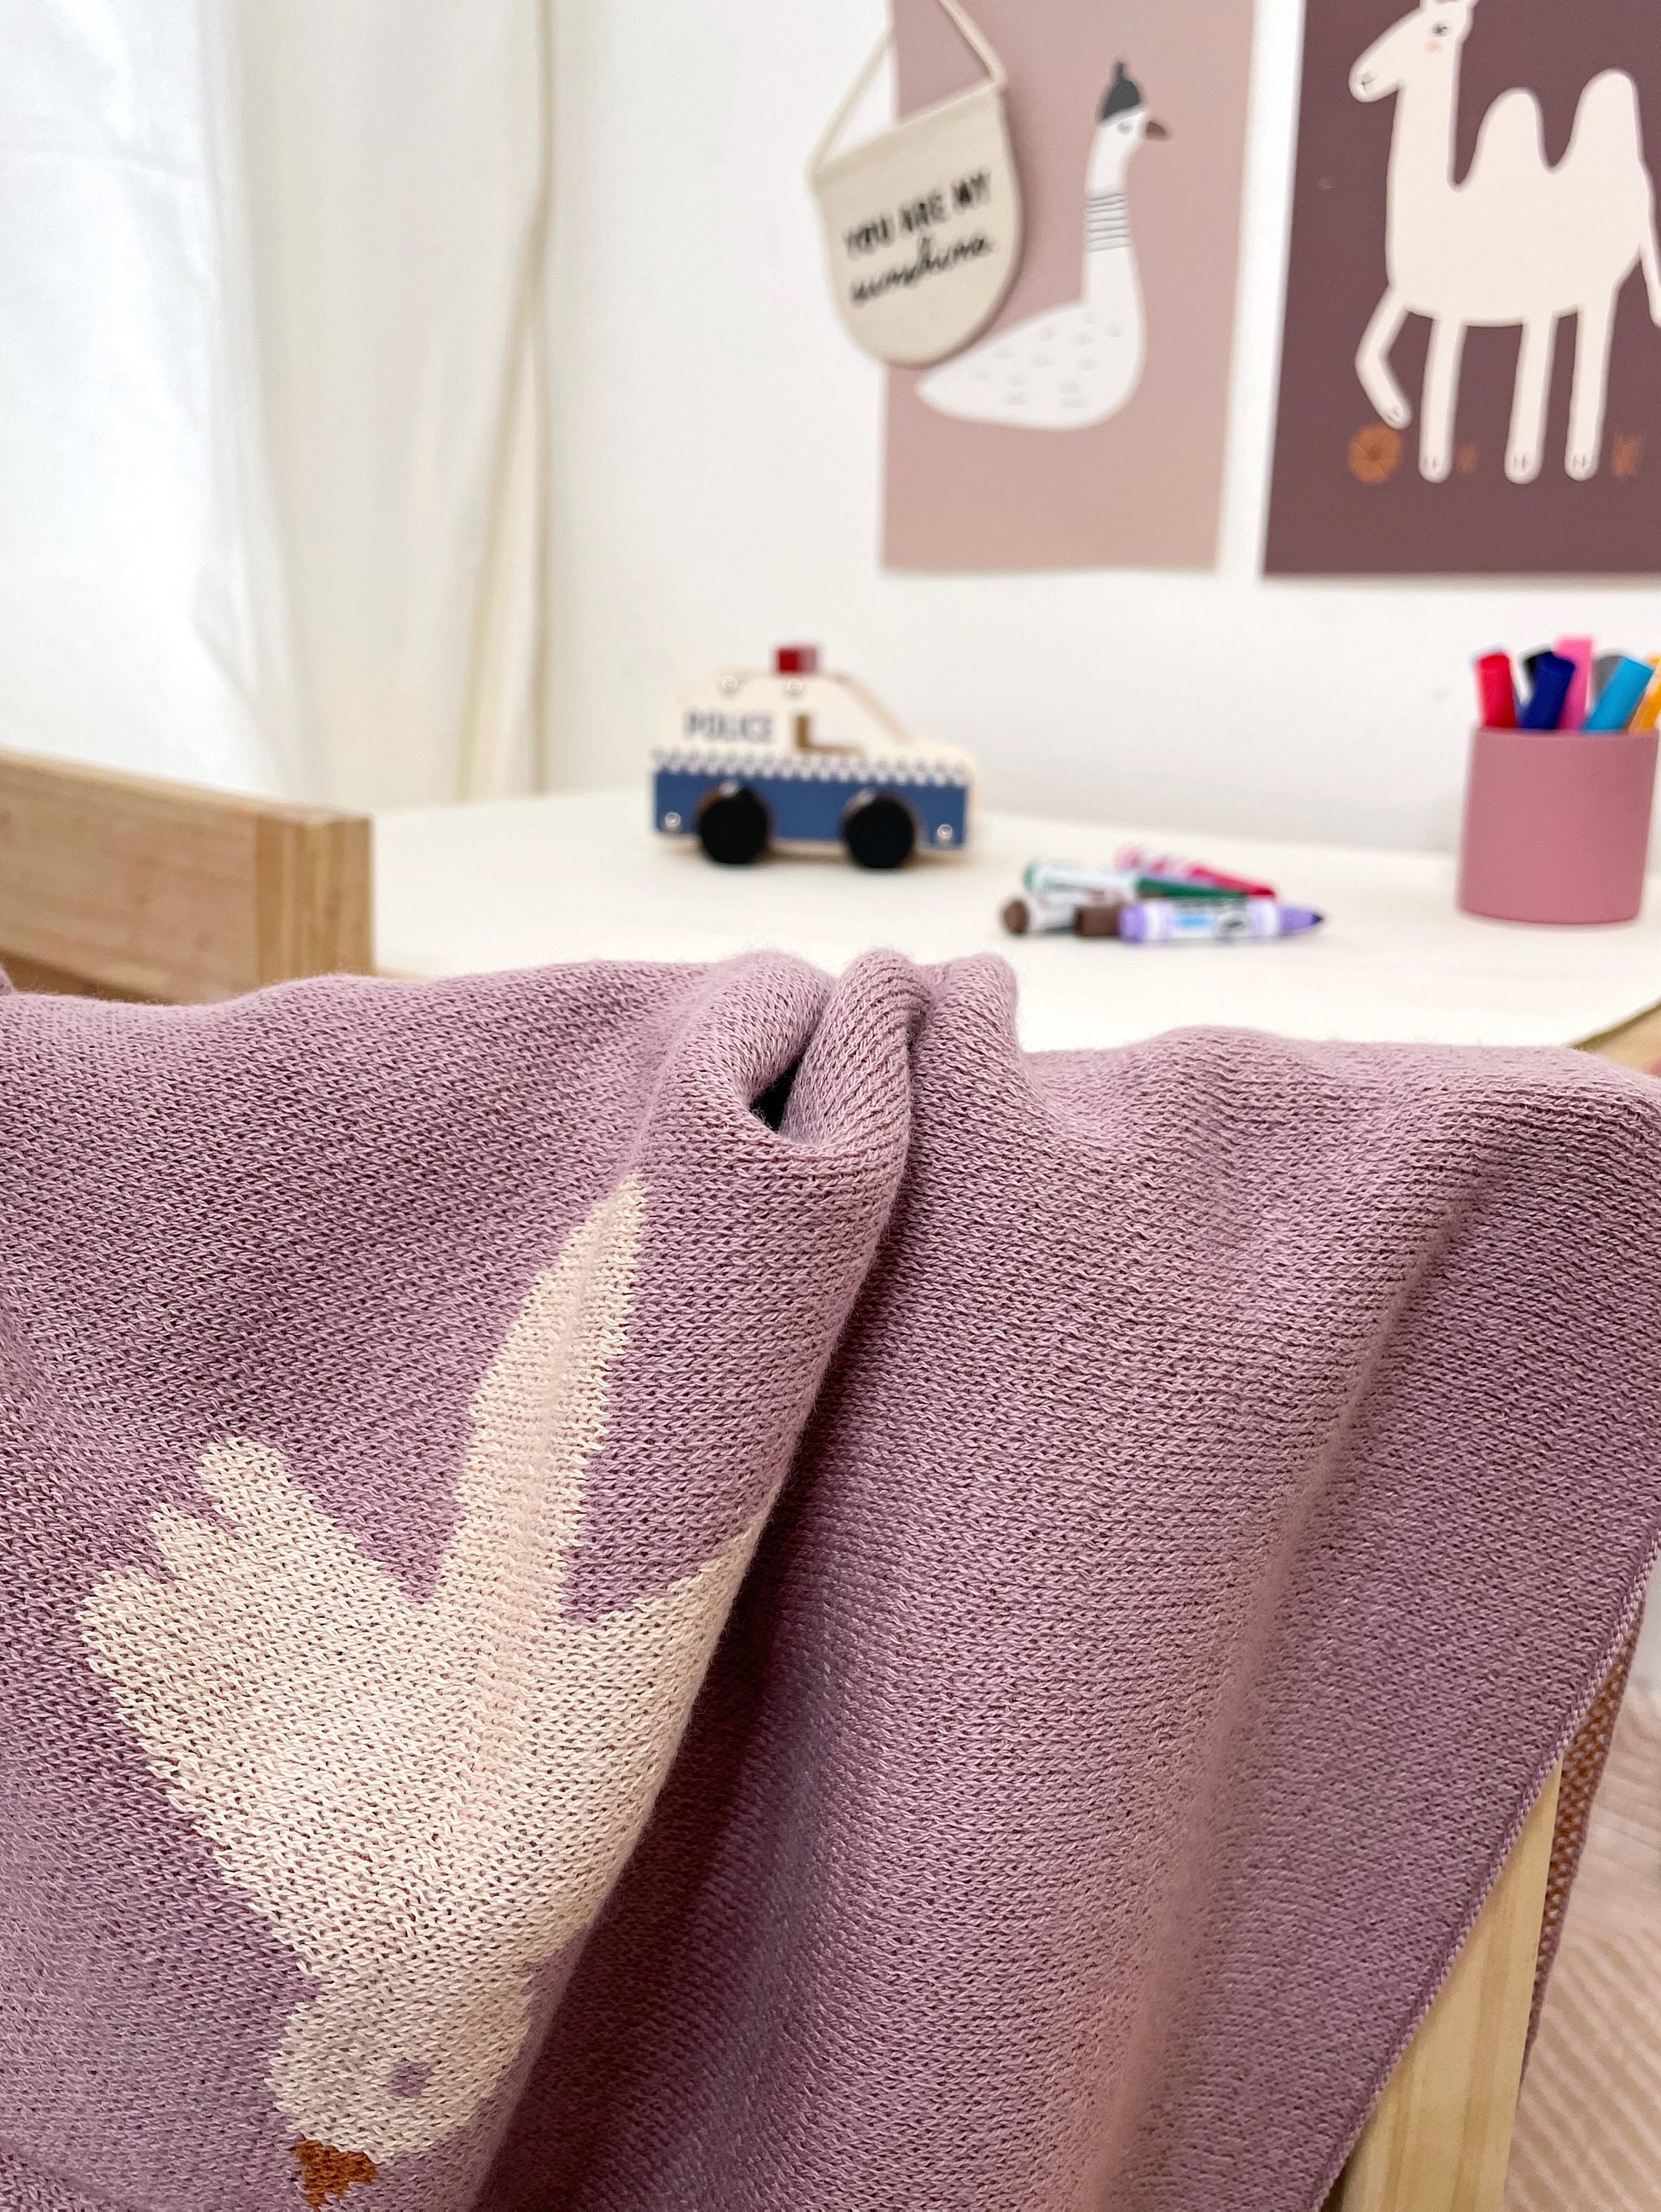 close up of a purple blanket with a white bird, with a child's play area in the background